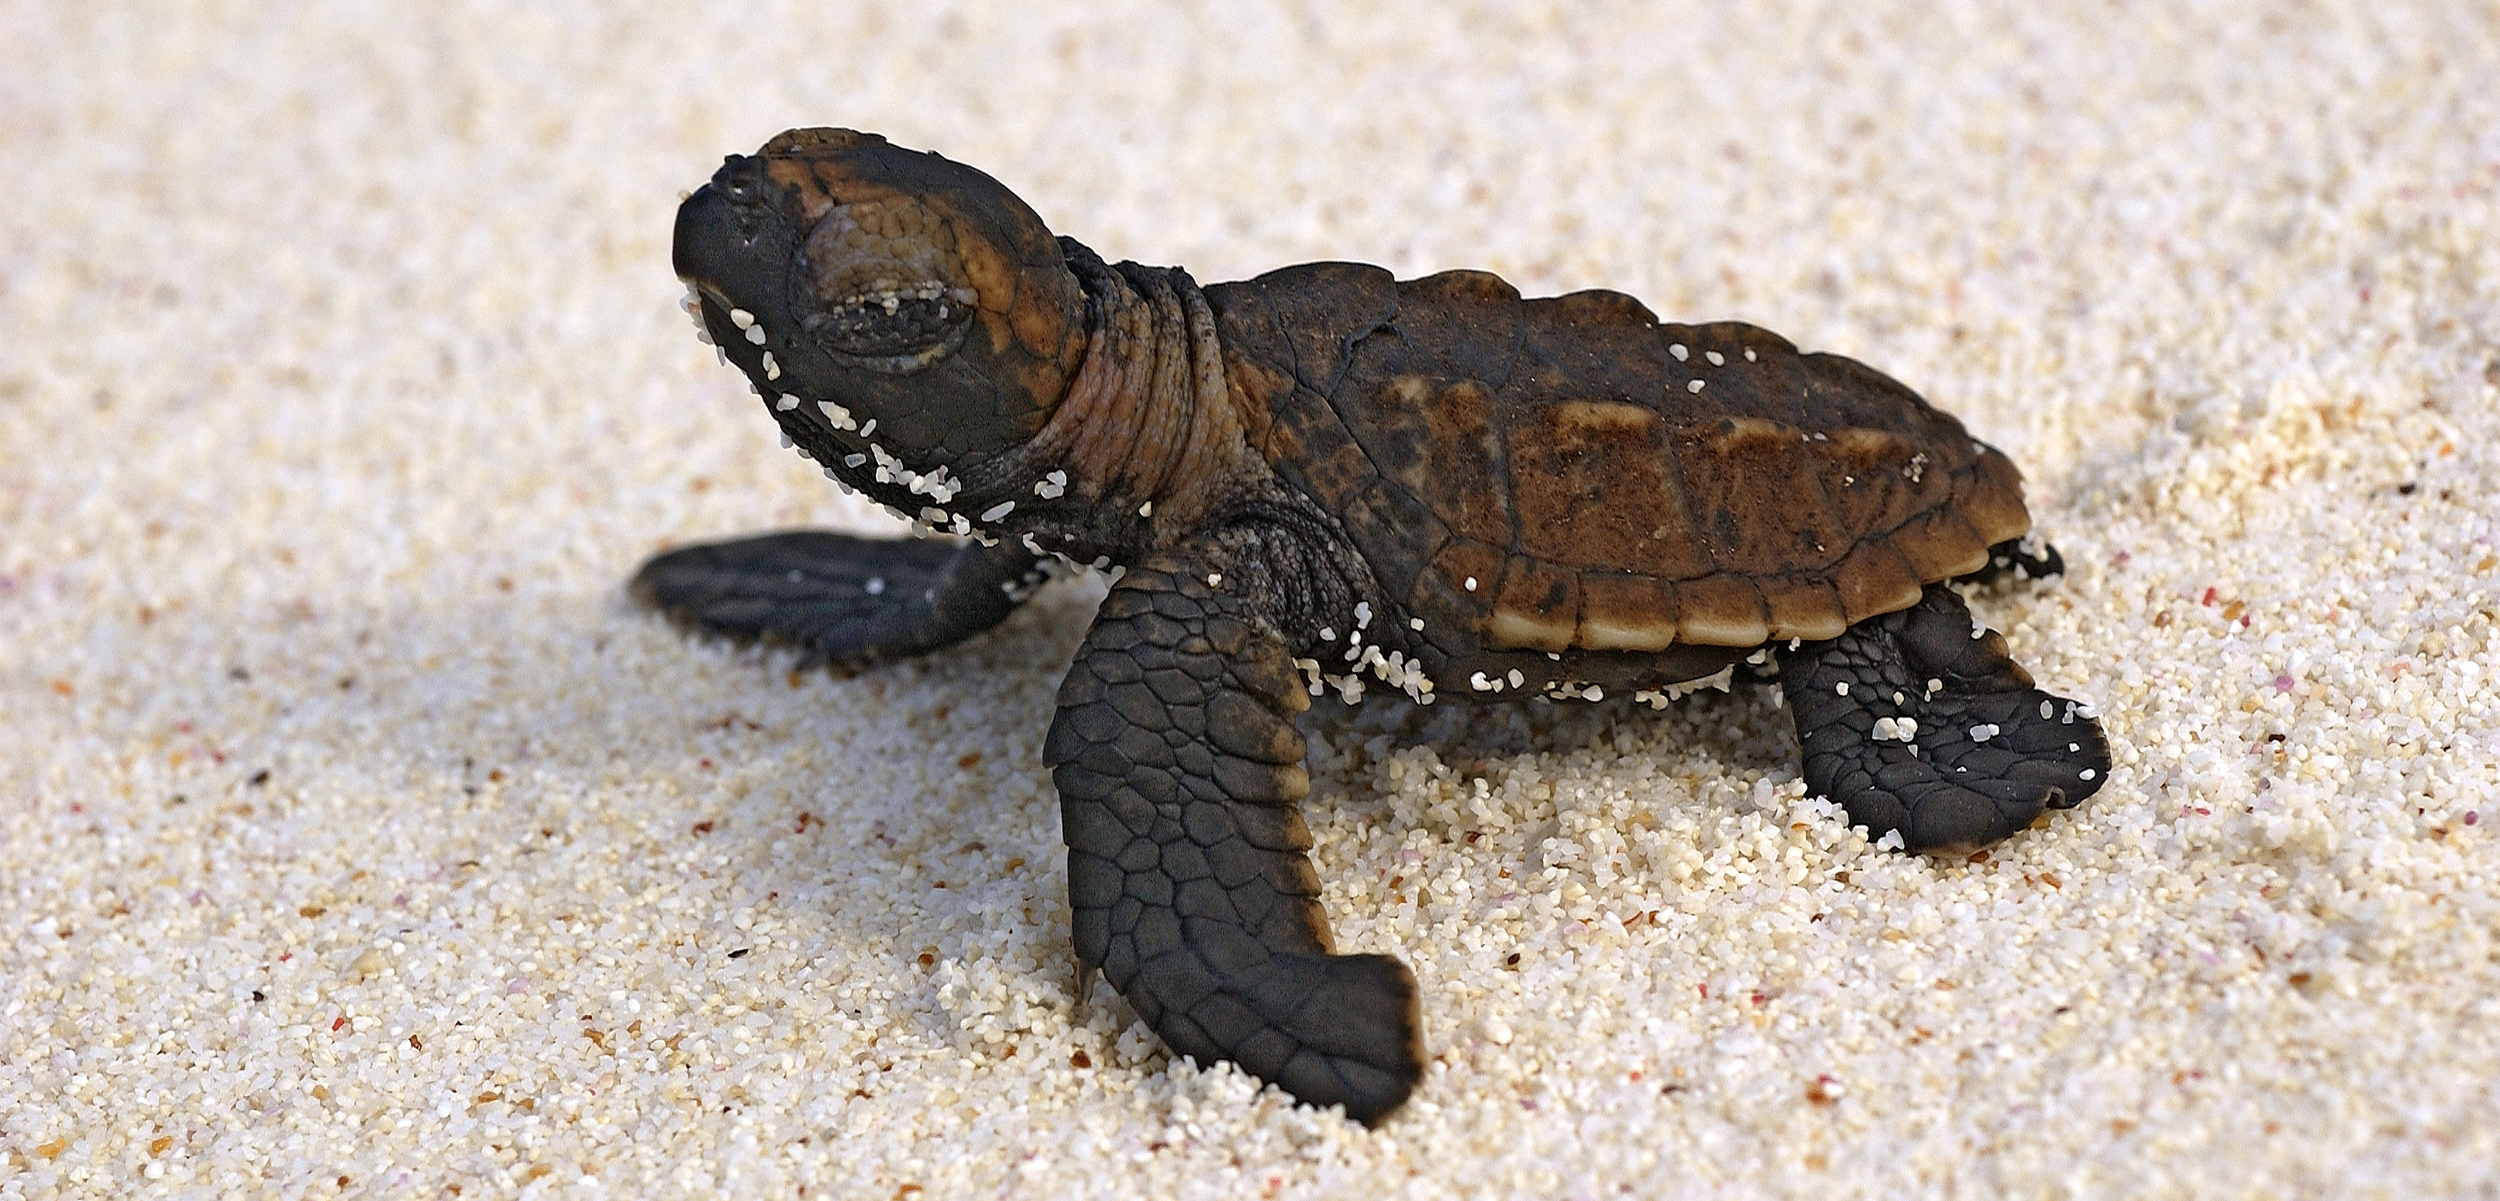 A small olive green baby sea turtle sits on a white sand beach